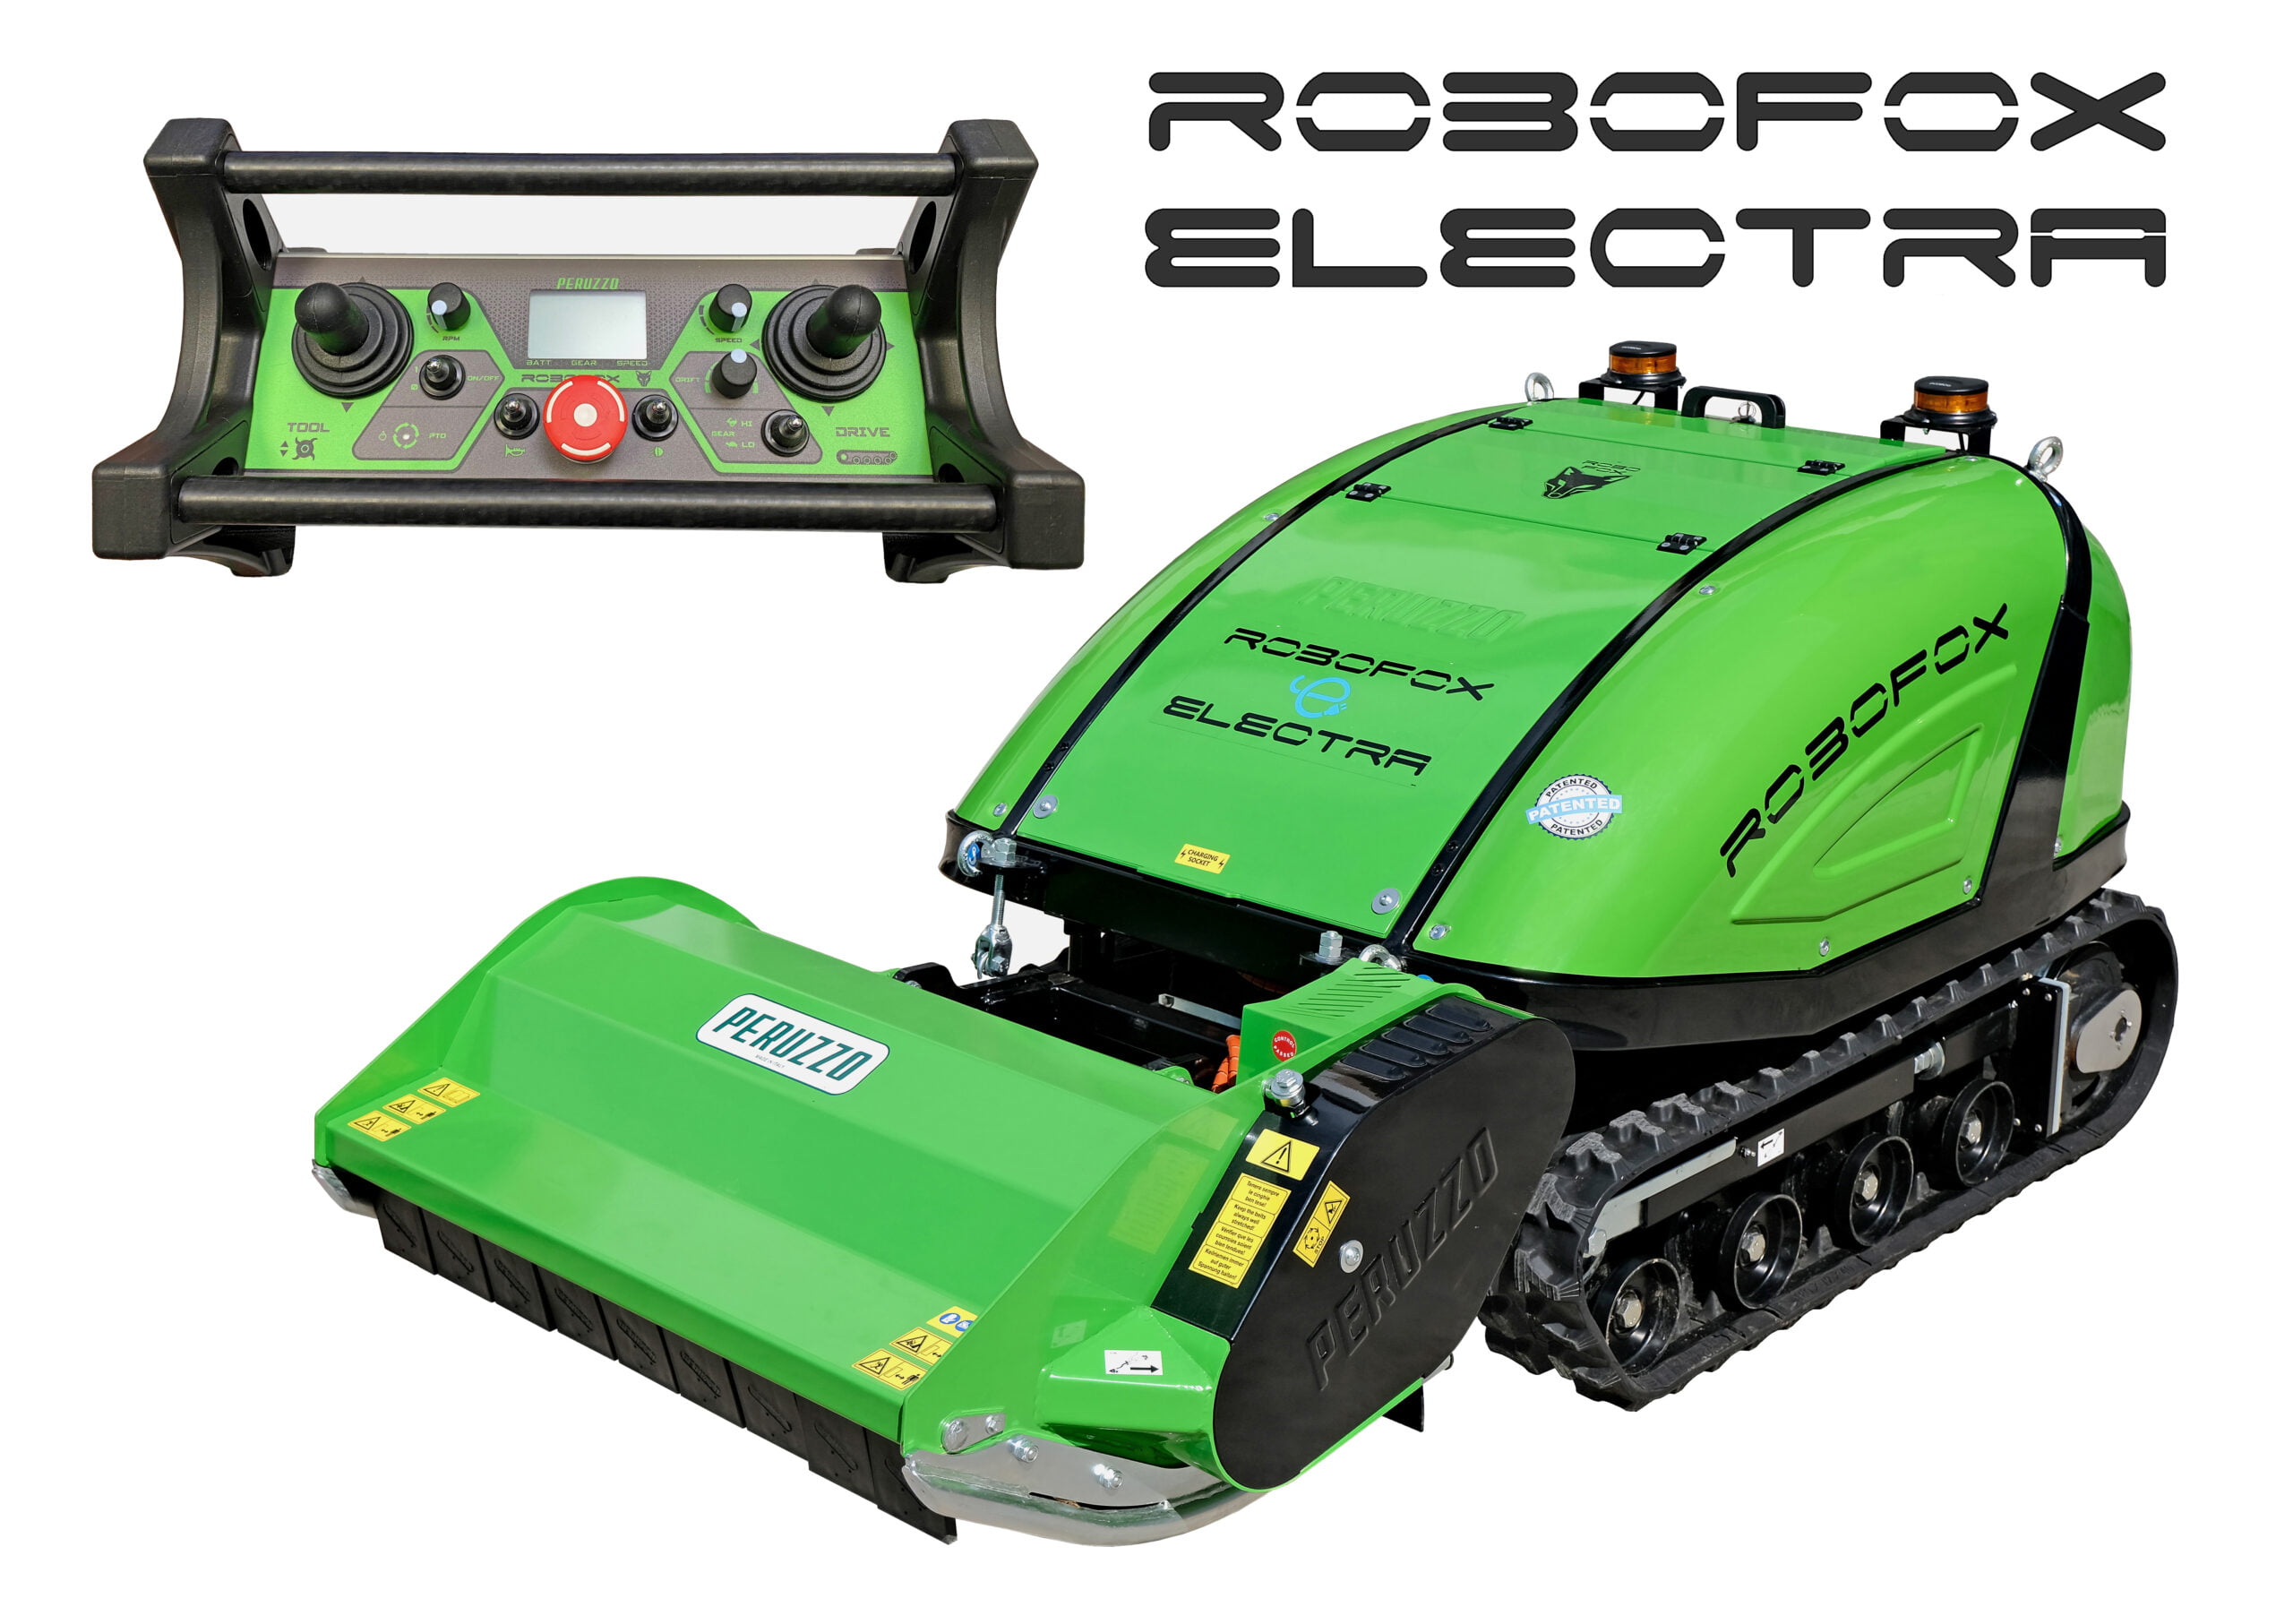 FULL ELECTRIC self-propelled remote-controlled flail mower ROBOFOX ELECTRA